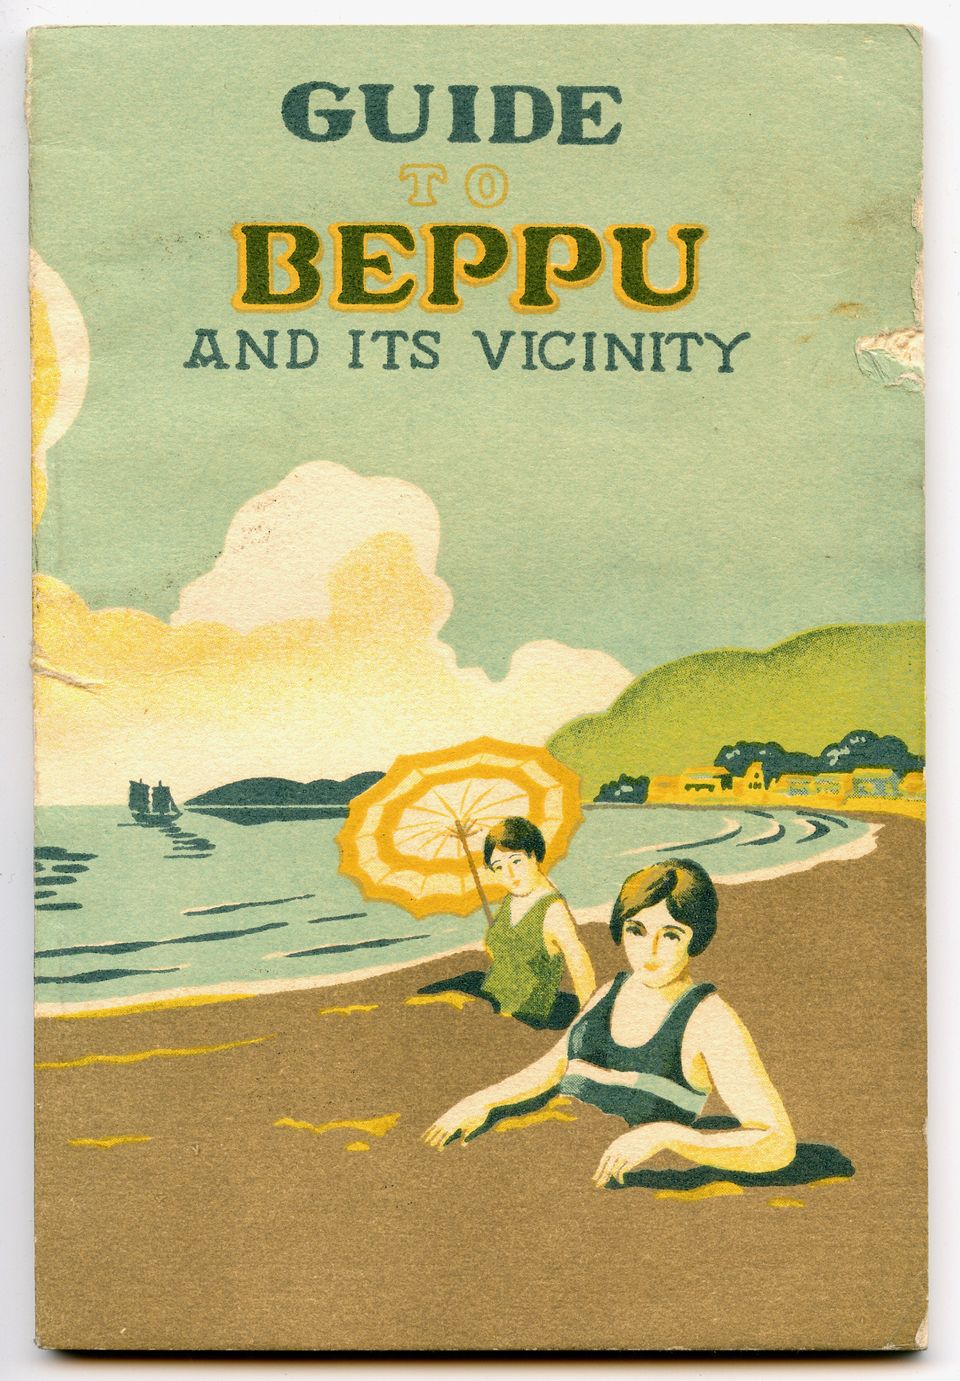 Guide to Beppu and Its Vicinity, Japan 1932